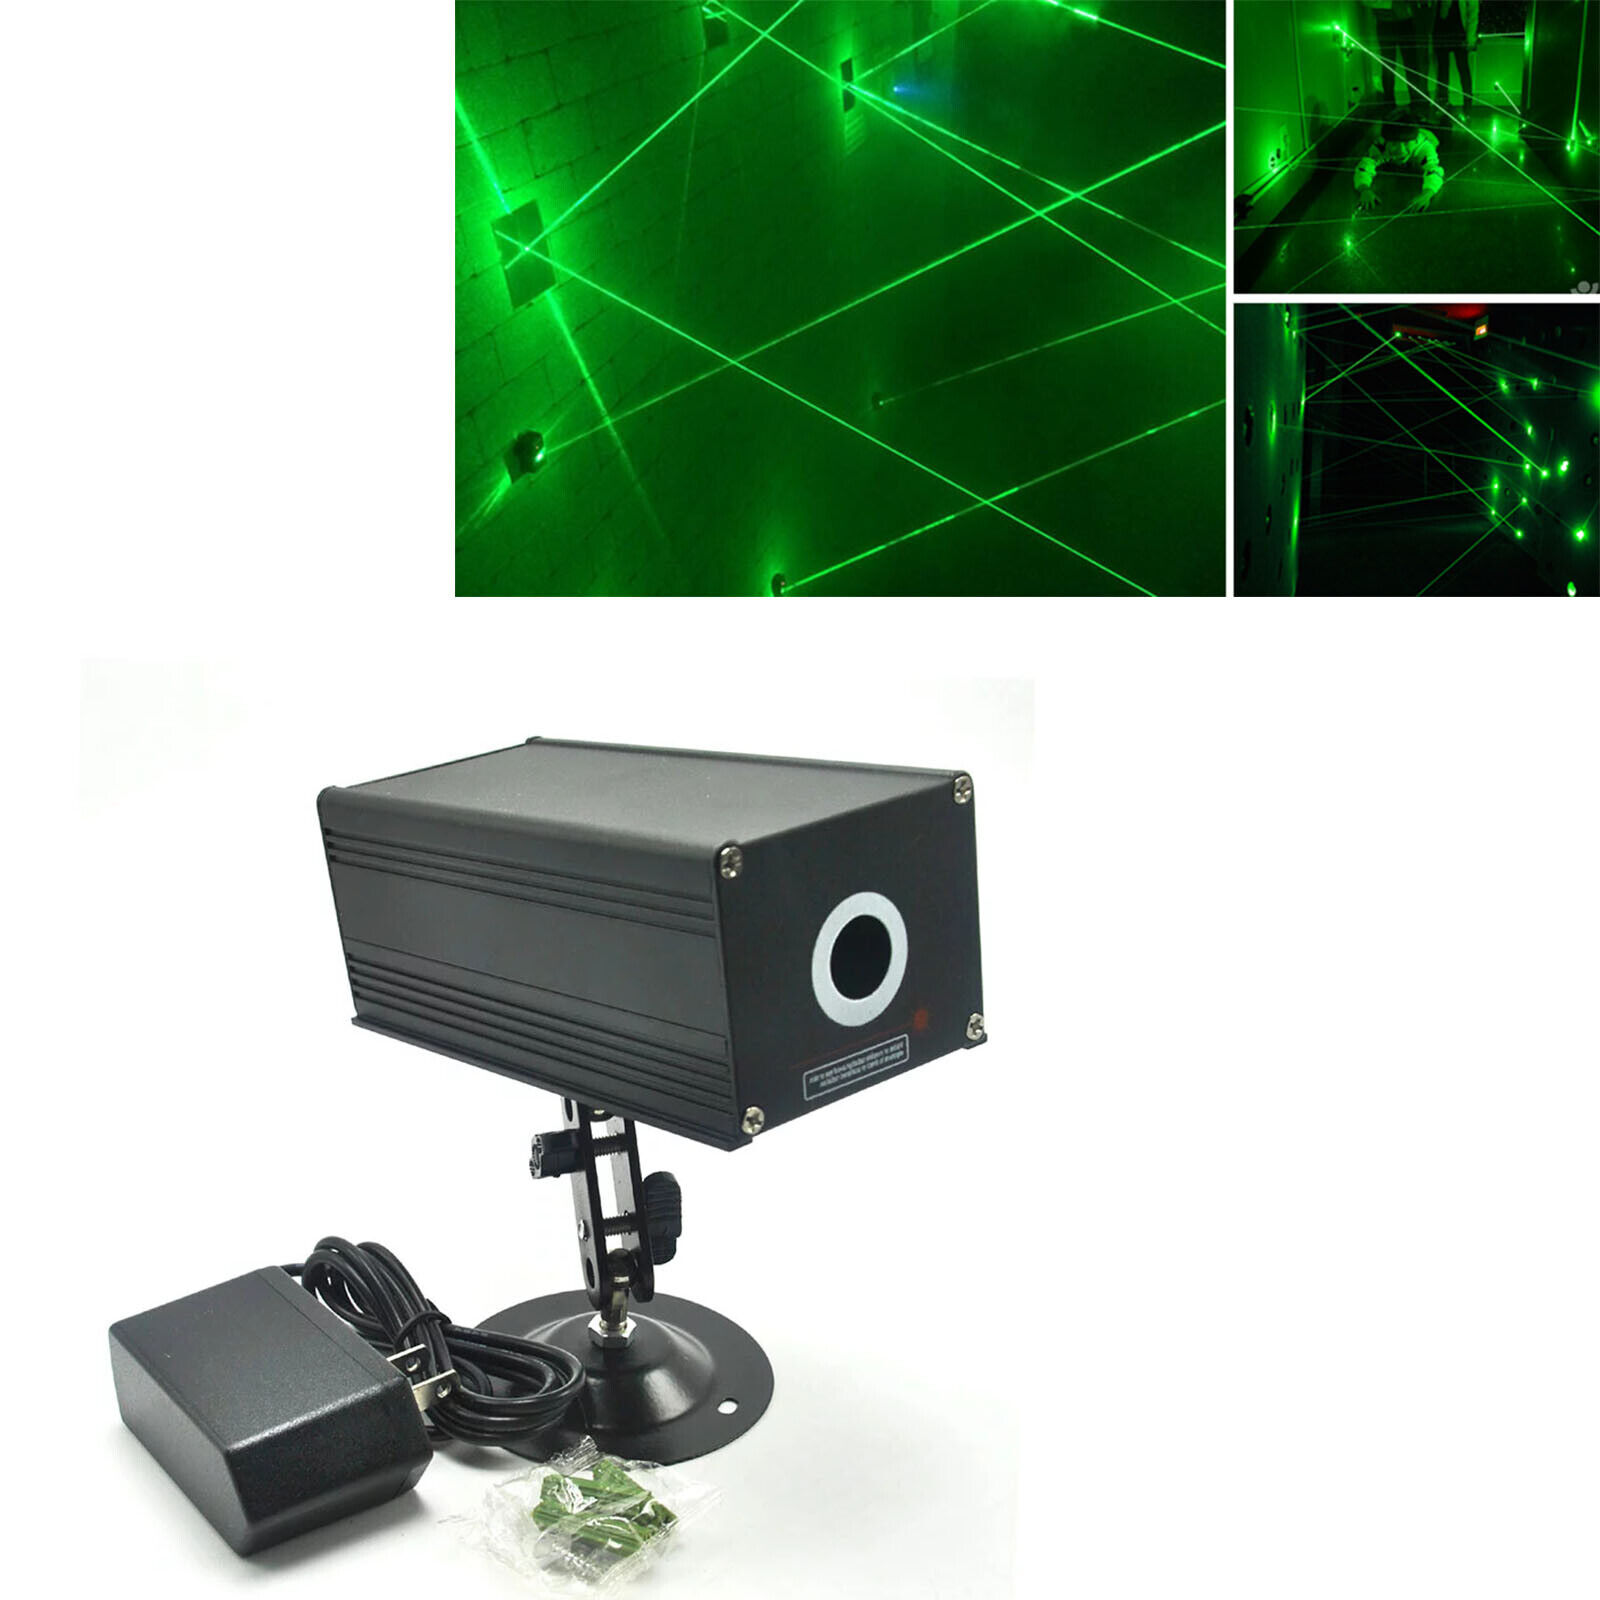 Pigment Civilian Quickly 532nm 100mW Green Laser Module for Room Escape Long-Time Working /Bar Light  | eBay